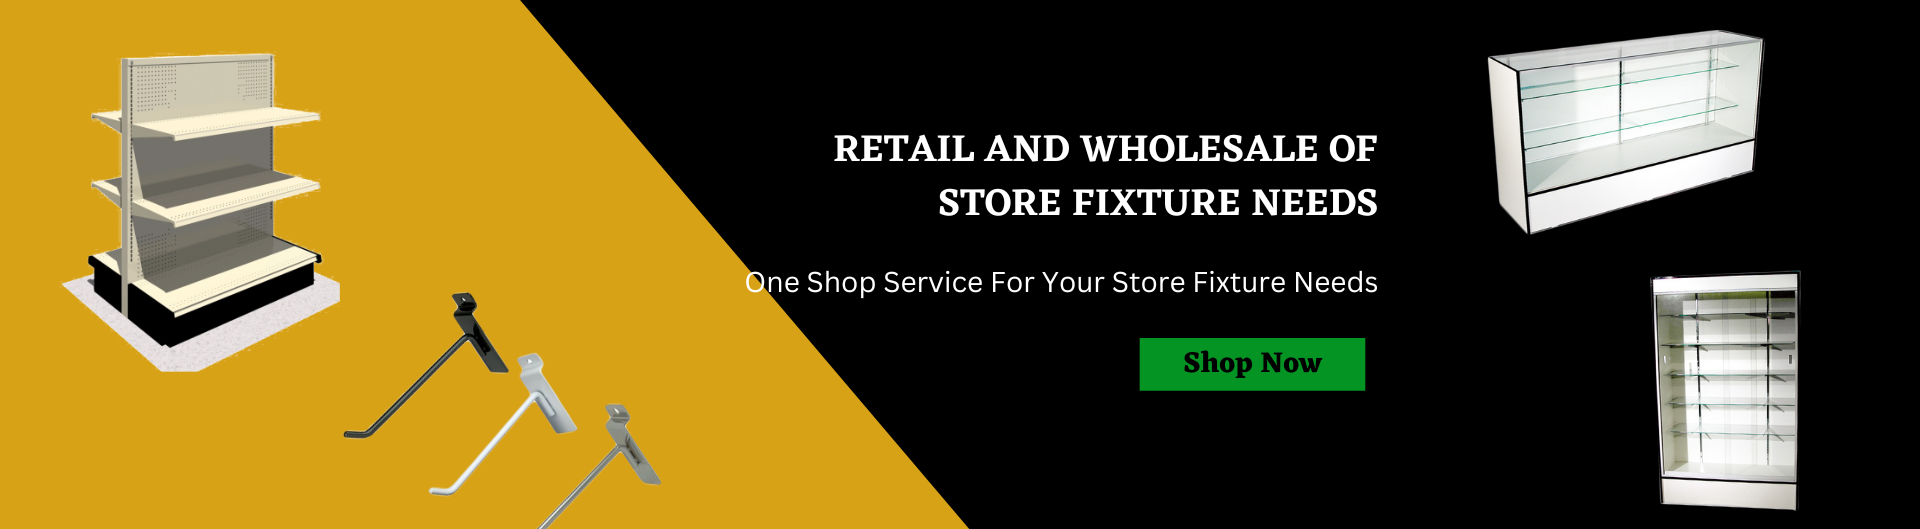 Retail And Whole Sale Of Store Fixtures